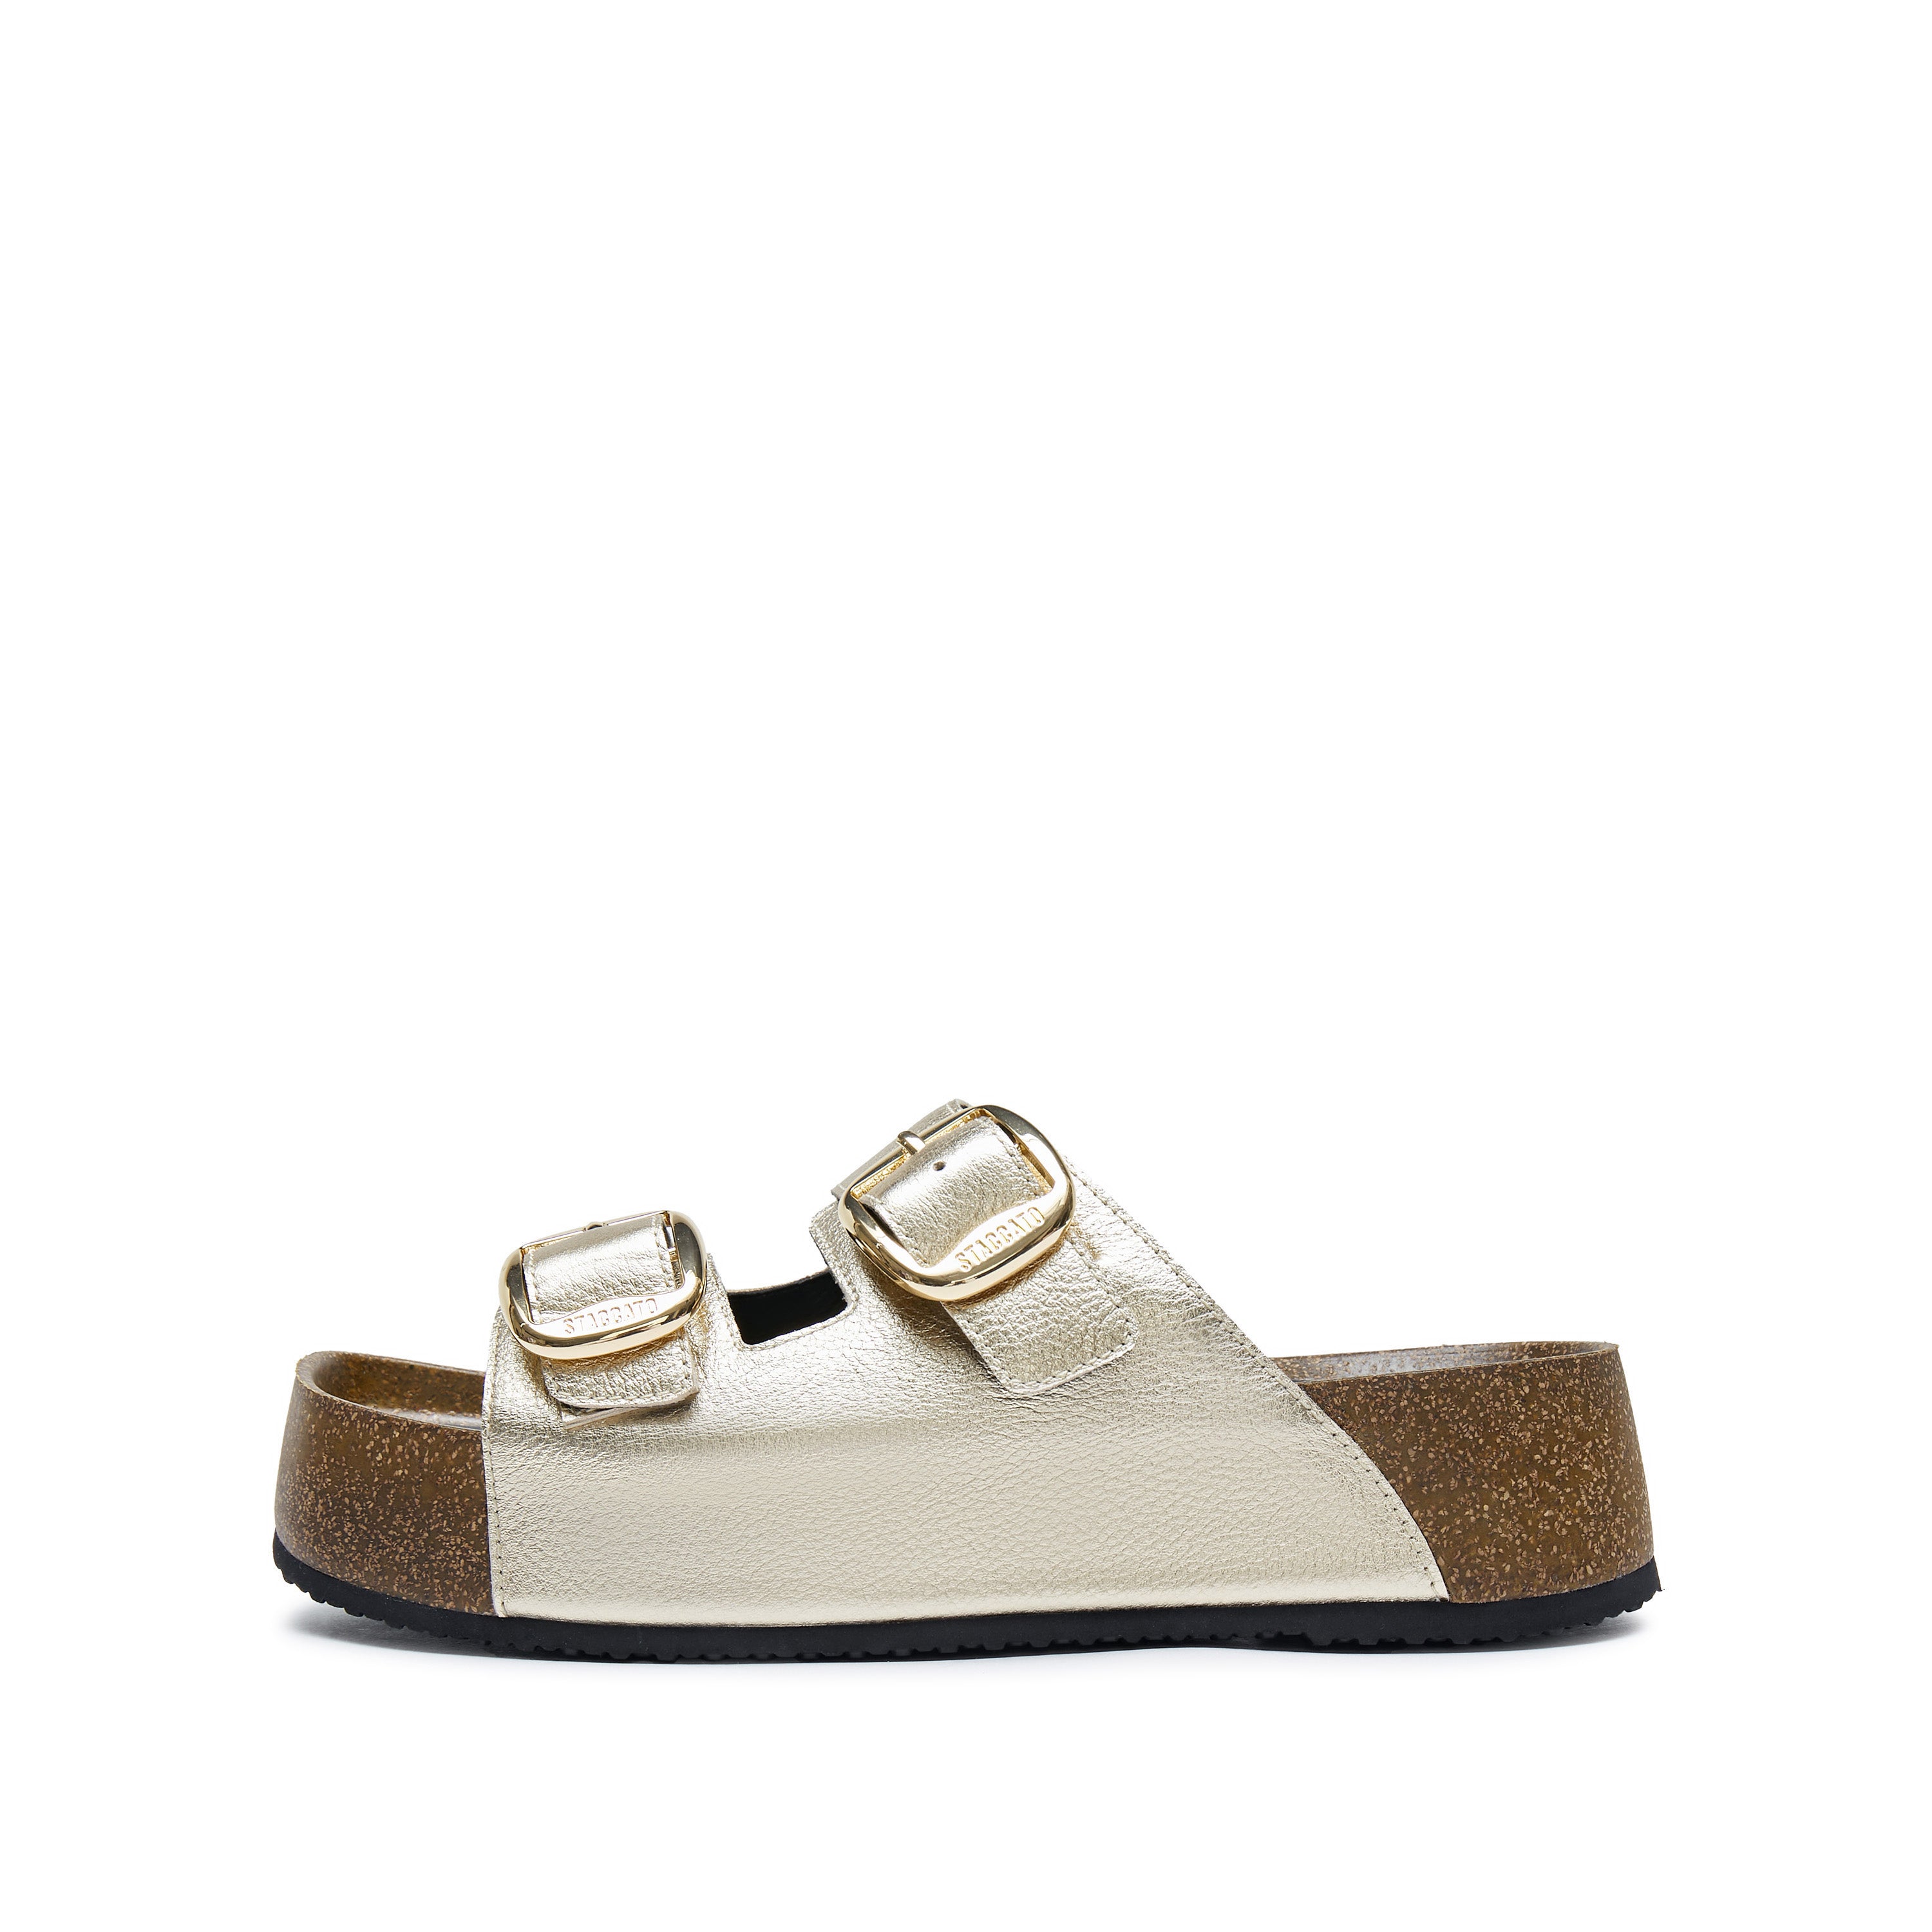 Light Gold Double strap Leather Sandals